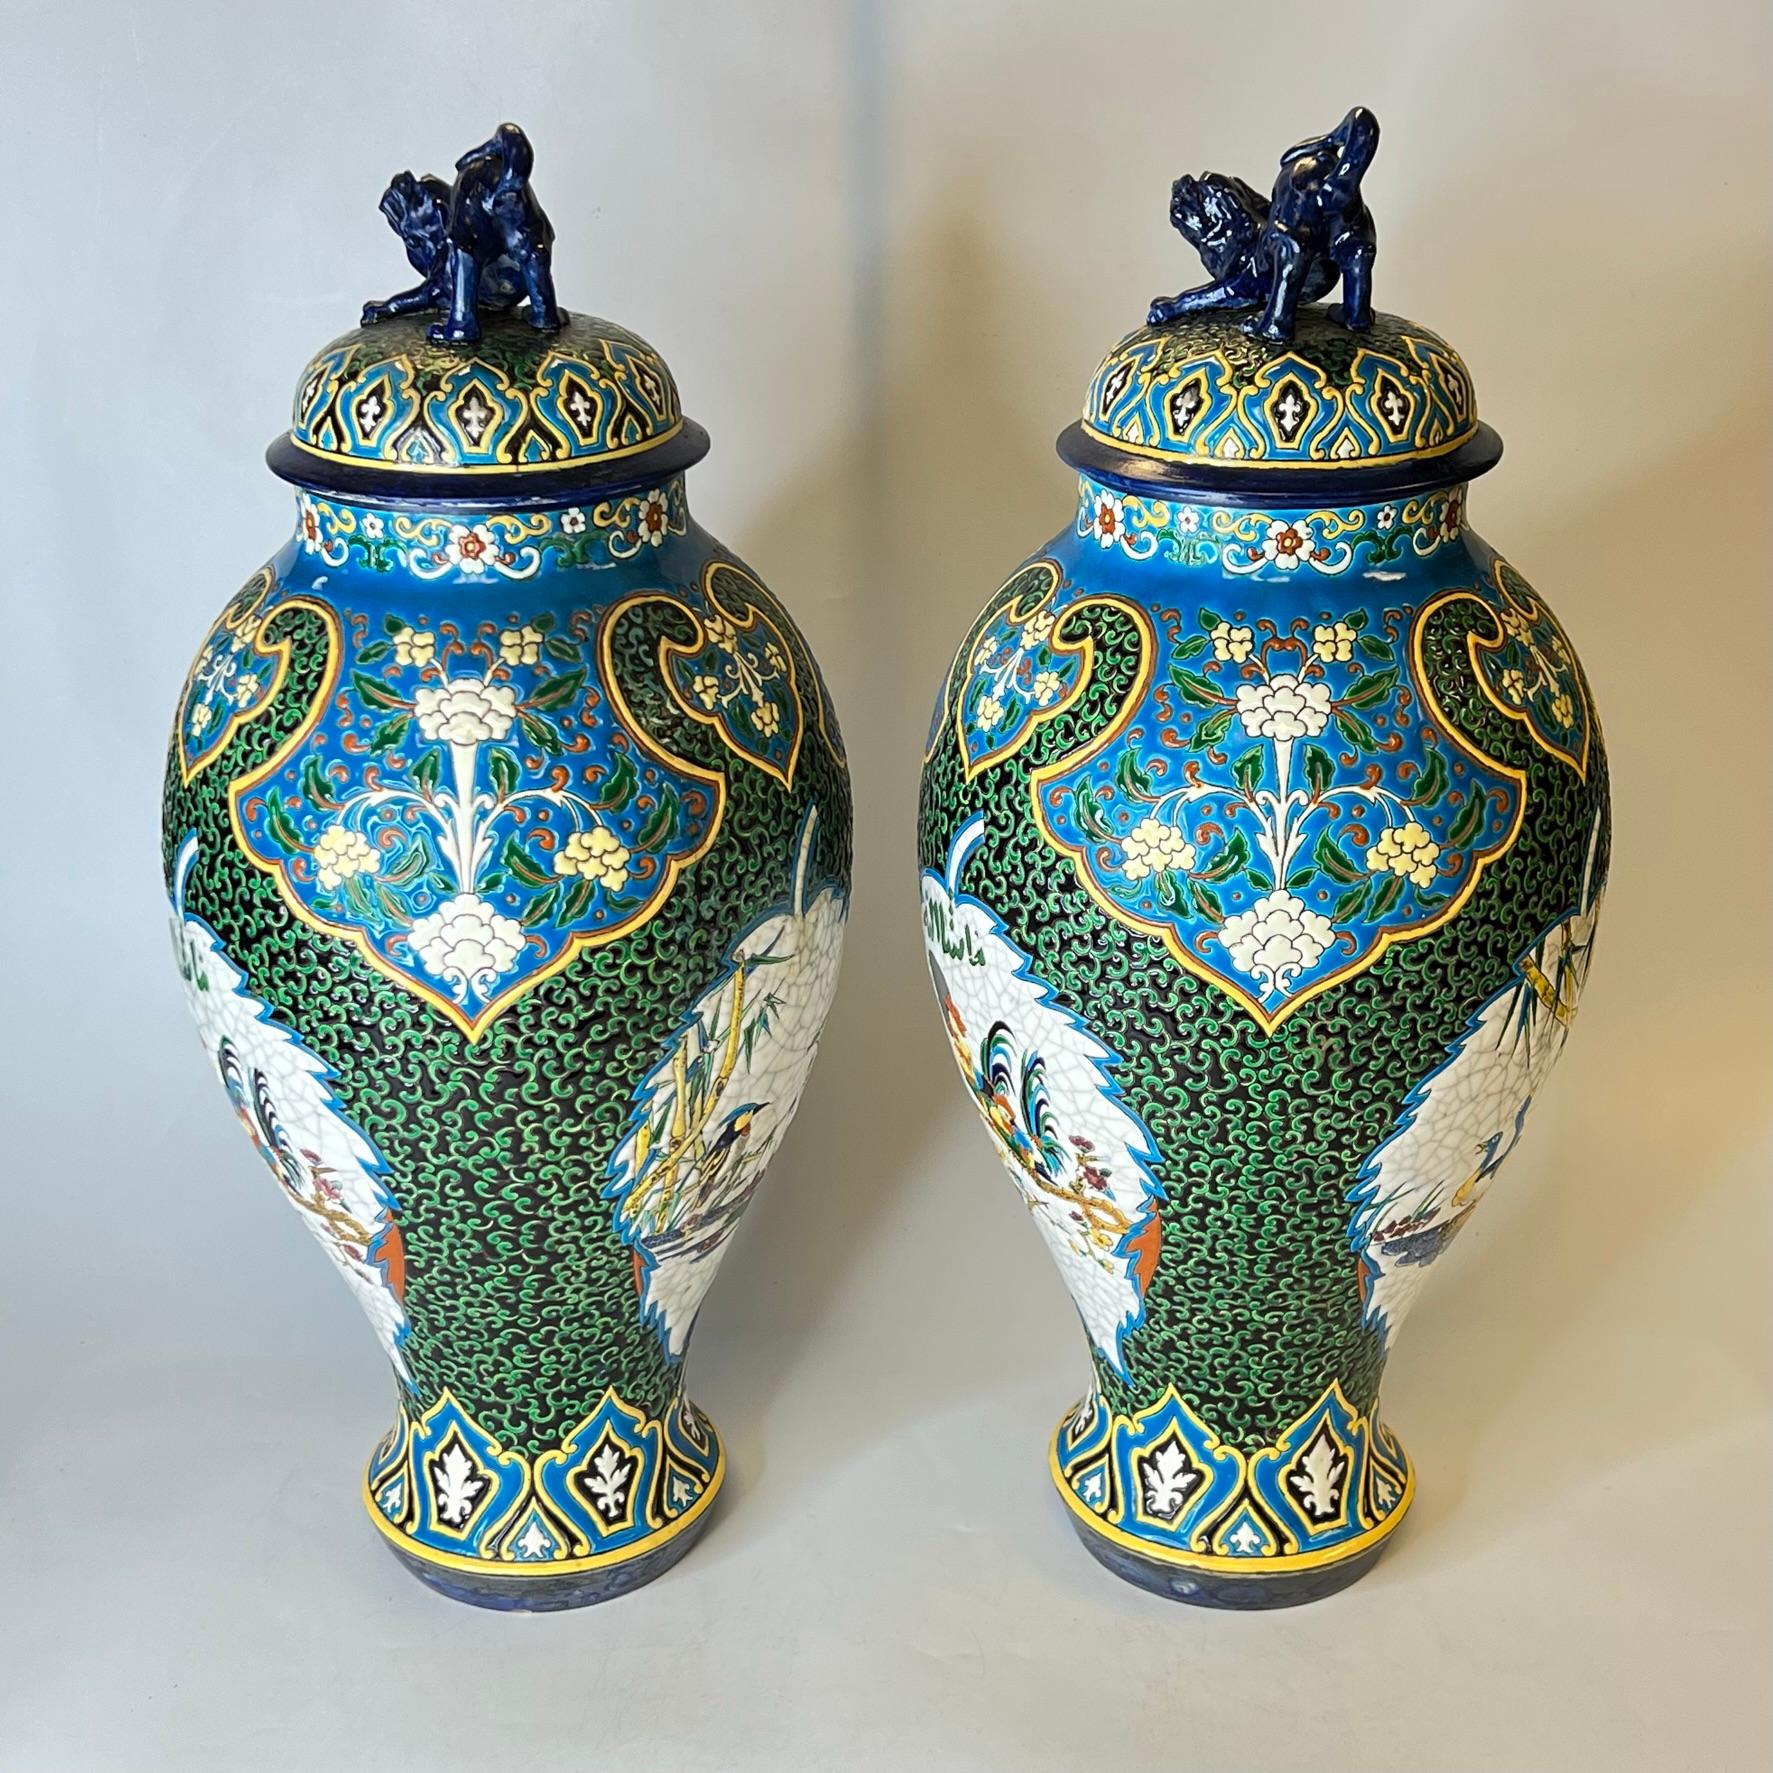 Aesthetic Movement Pair 19th Century French Faience Vases by J. Vieillard & Co with Islamic Motifs